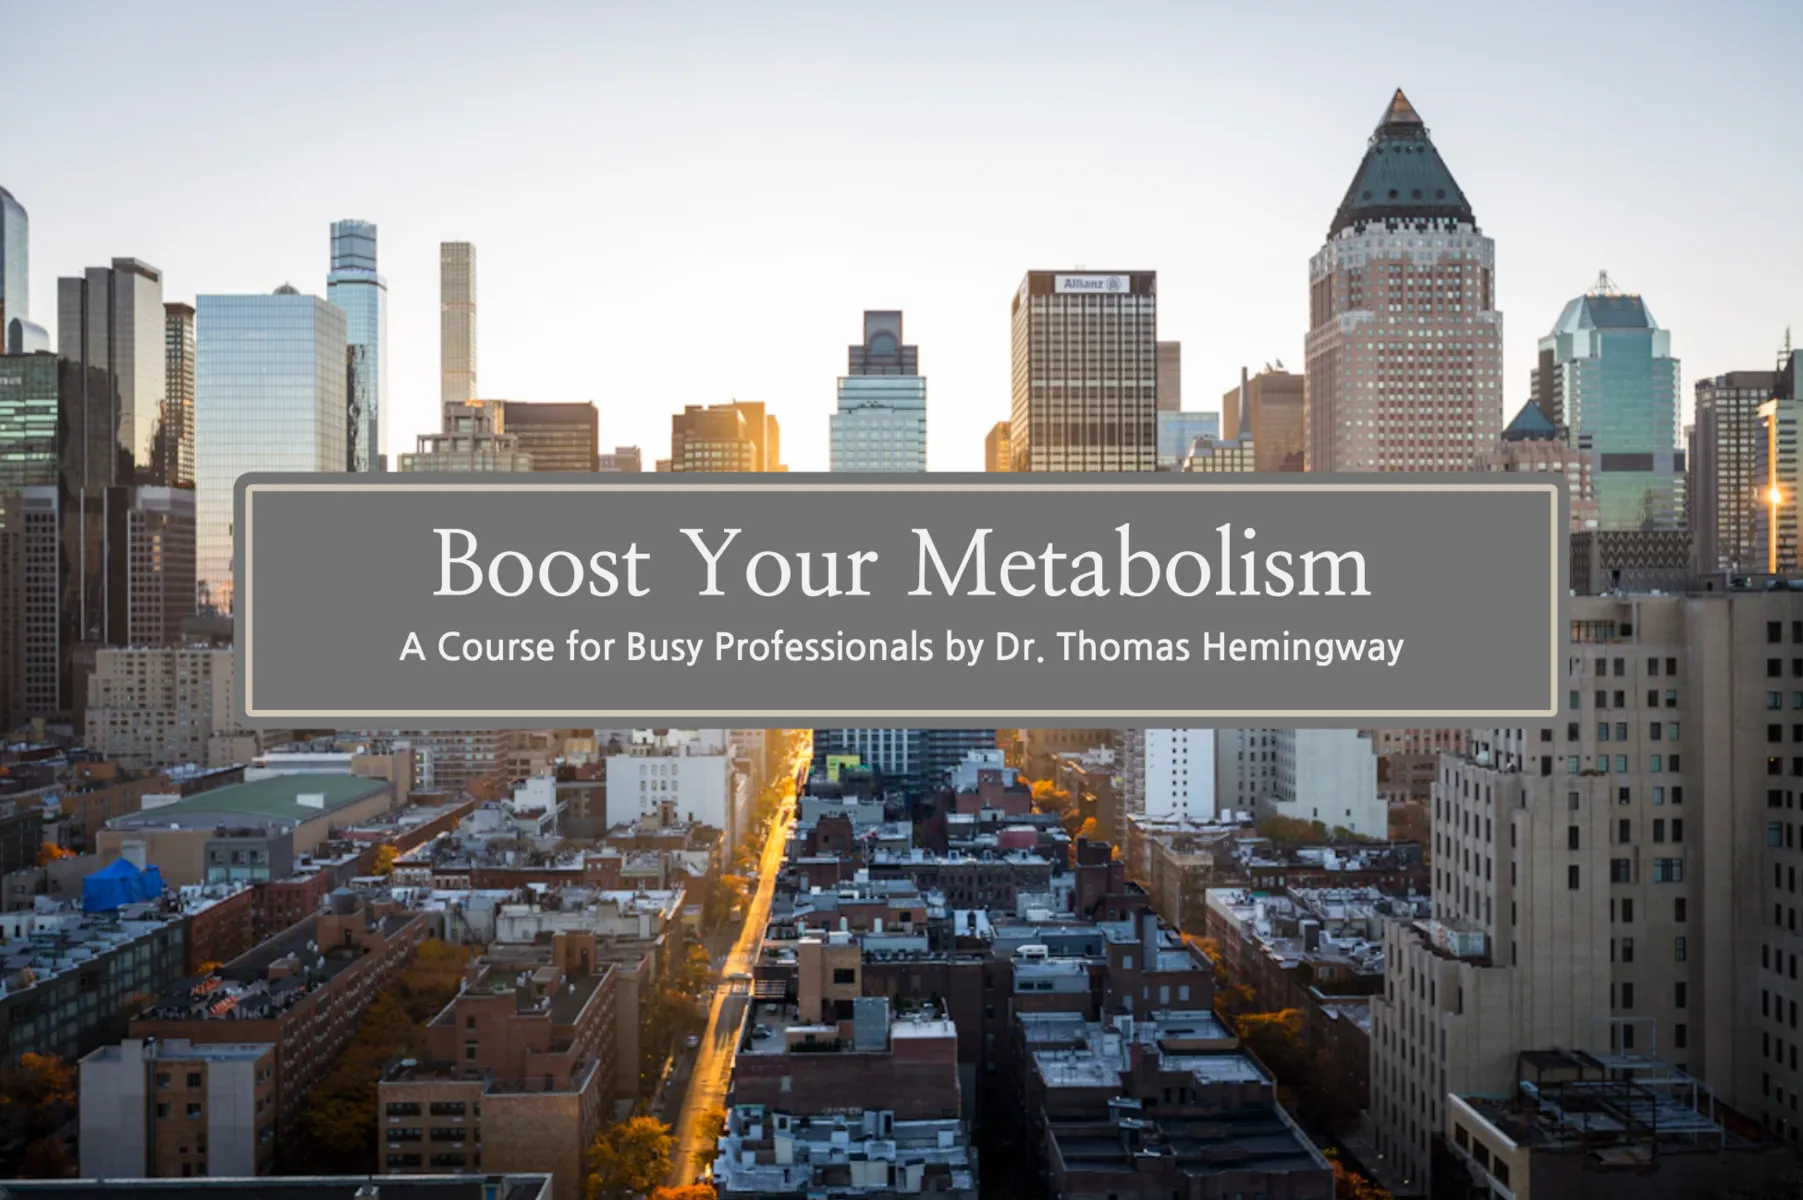 Boost Your Metabolism: A Course for Busy Professionals